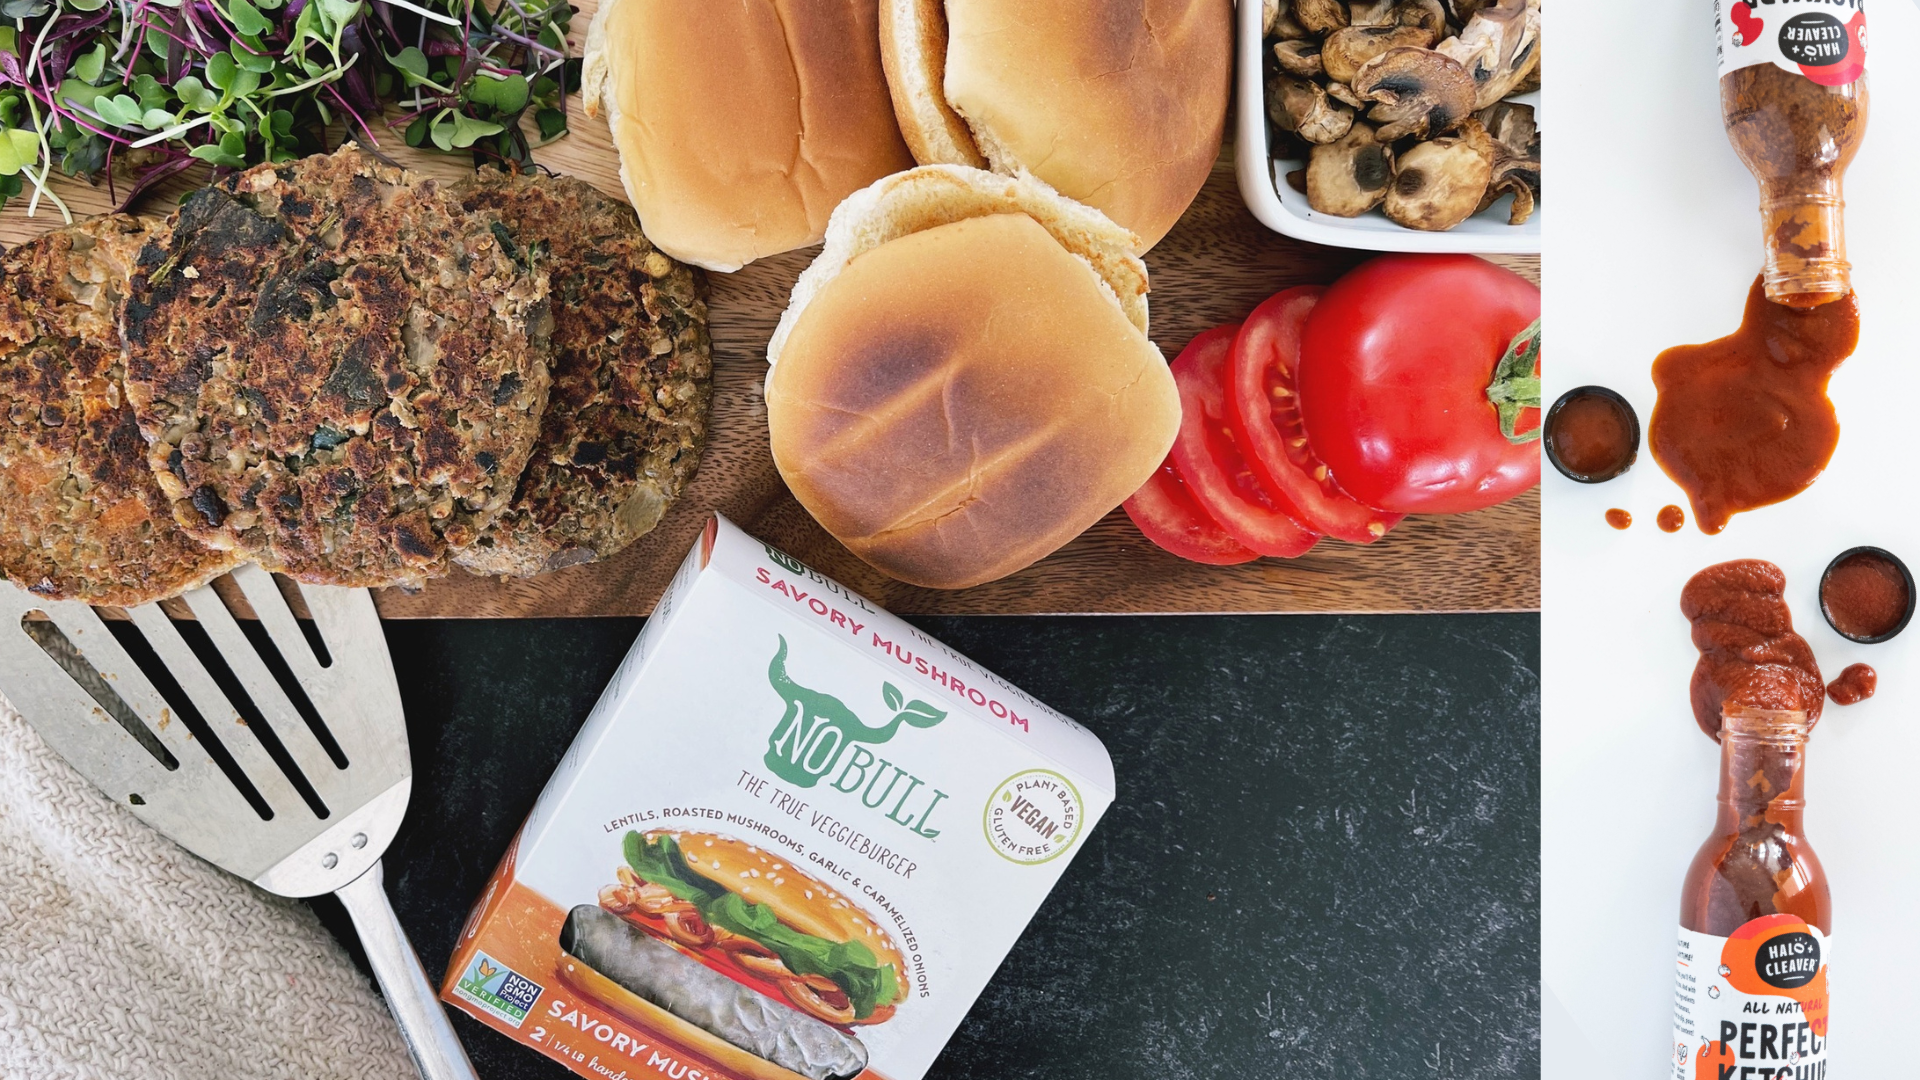 A platter of veggie burger fixings with sprouts, grilled mushrooms and tomatoes, with a product package for NoBull burgers and two bottles of Halo + Cleaver sauces.